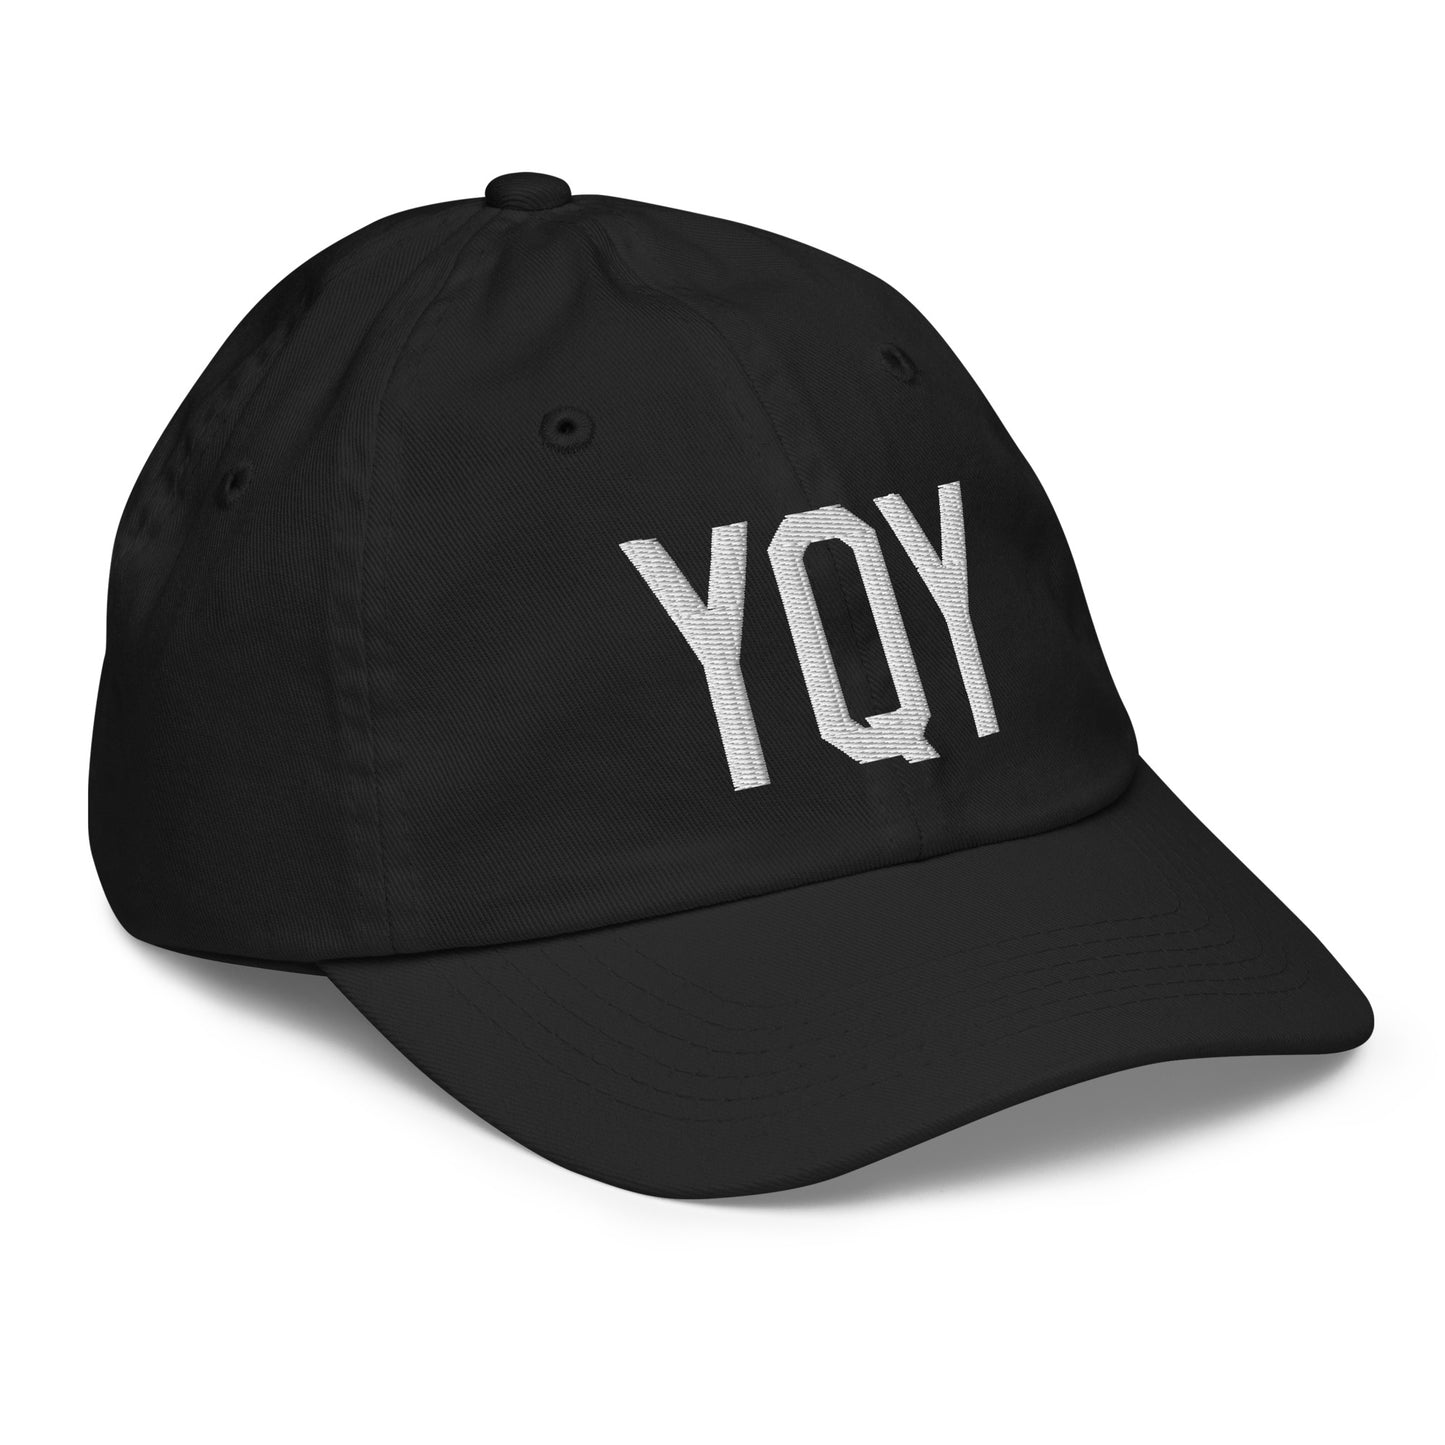 Airport Code Kid's Baseball Cap - White • YQY Sydney • YHM Designs - Image 12